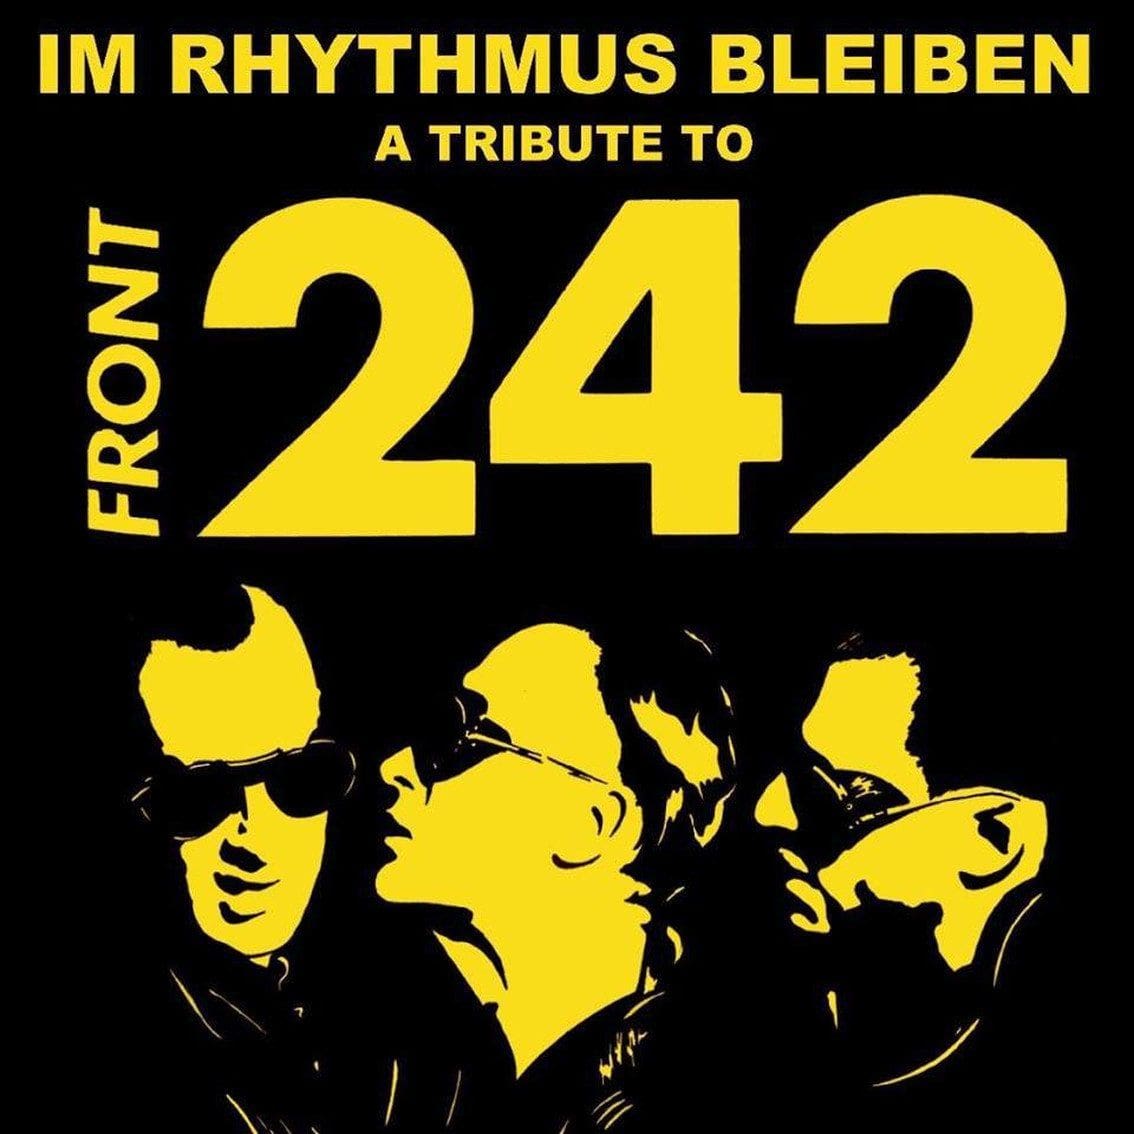 The 'Im Rhythmus bleiben (A Tribute to Front 242)' set gets re-released in yellow on 242 copies - you can order your copy here